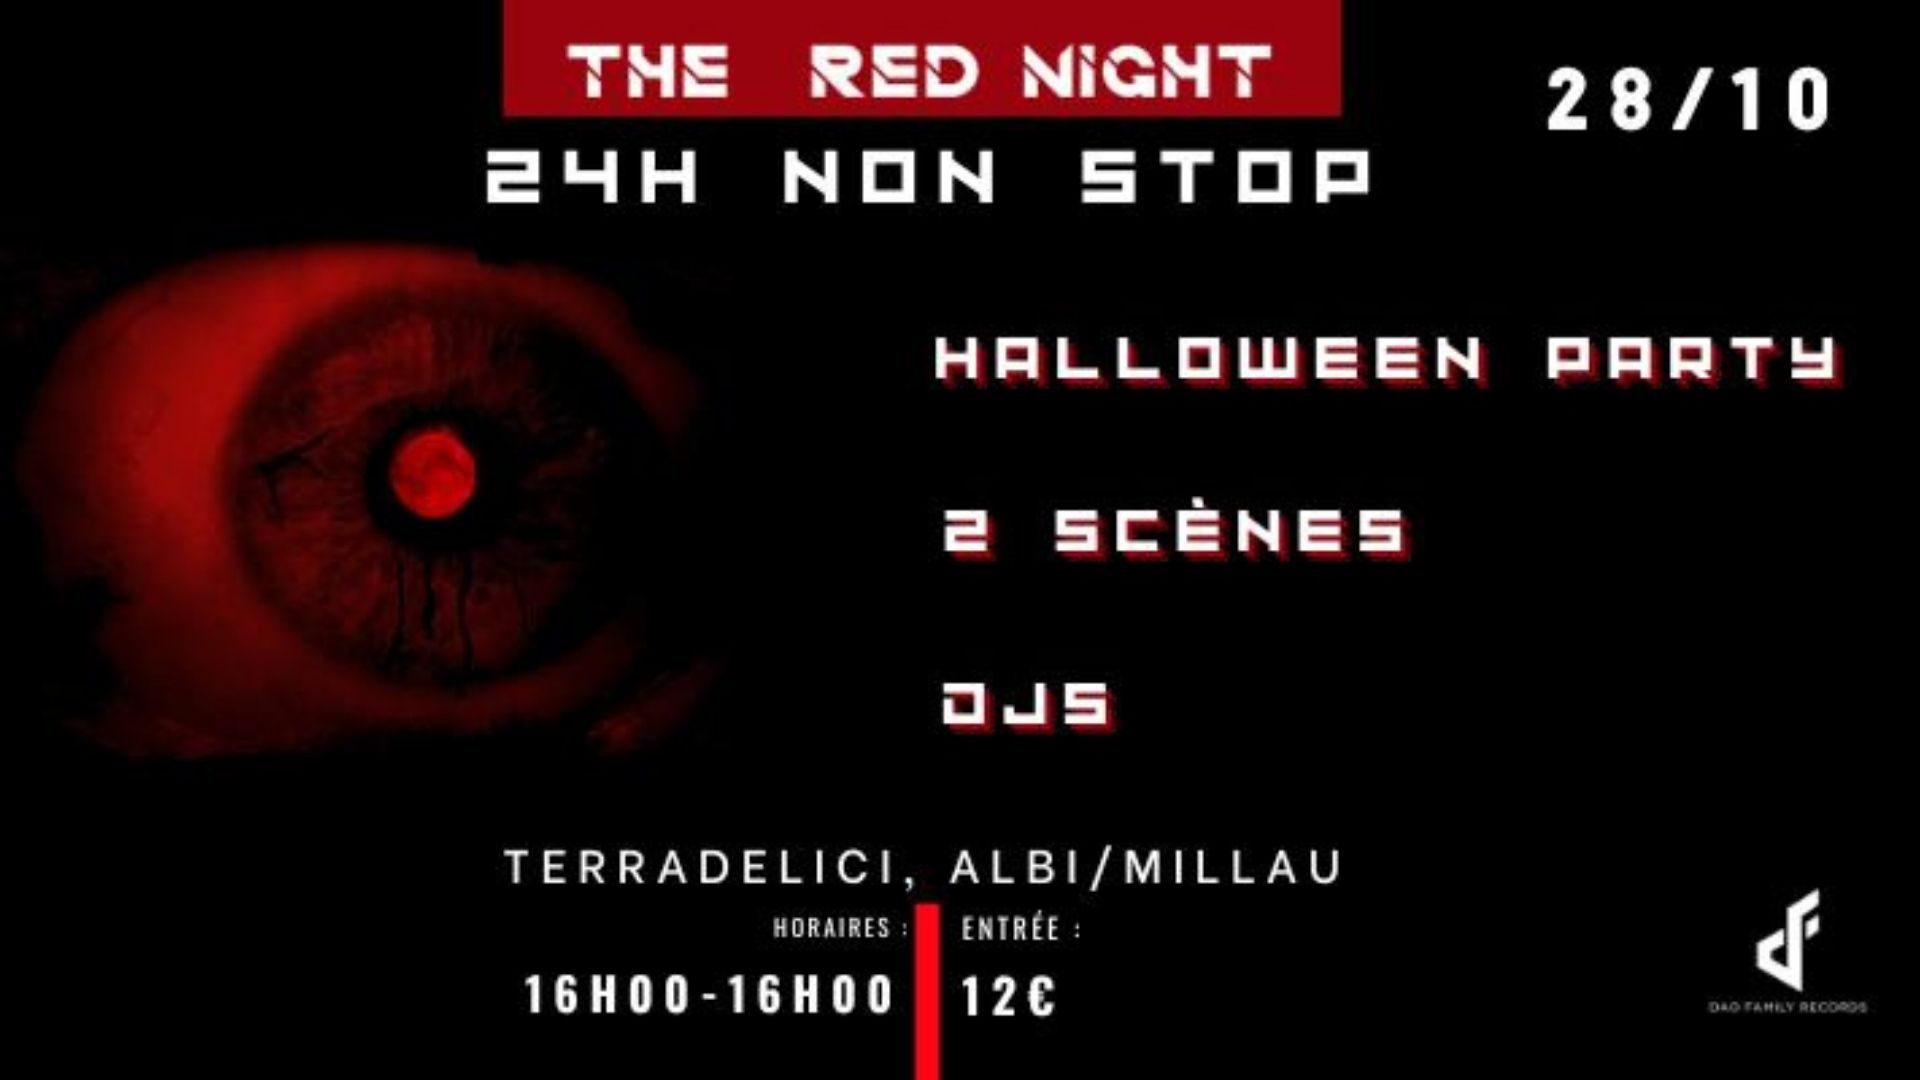 Affiche de The Red Night